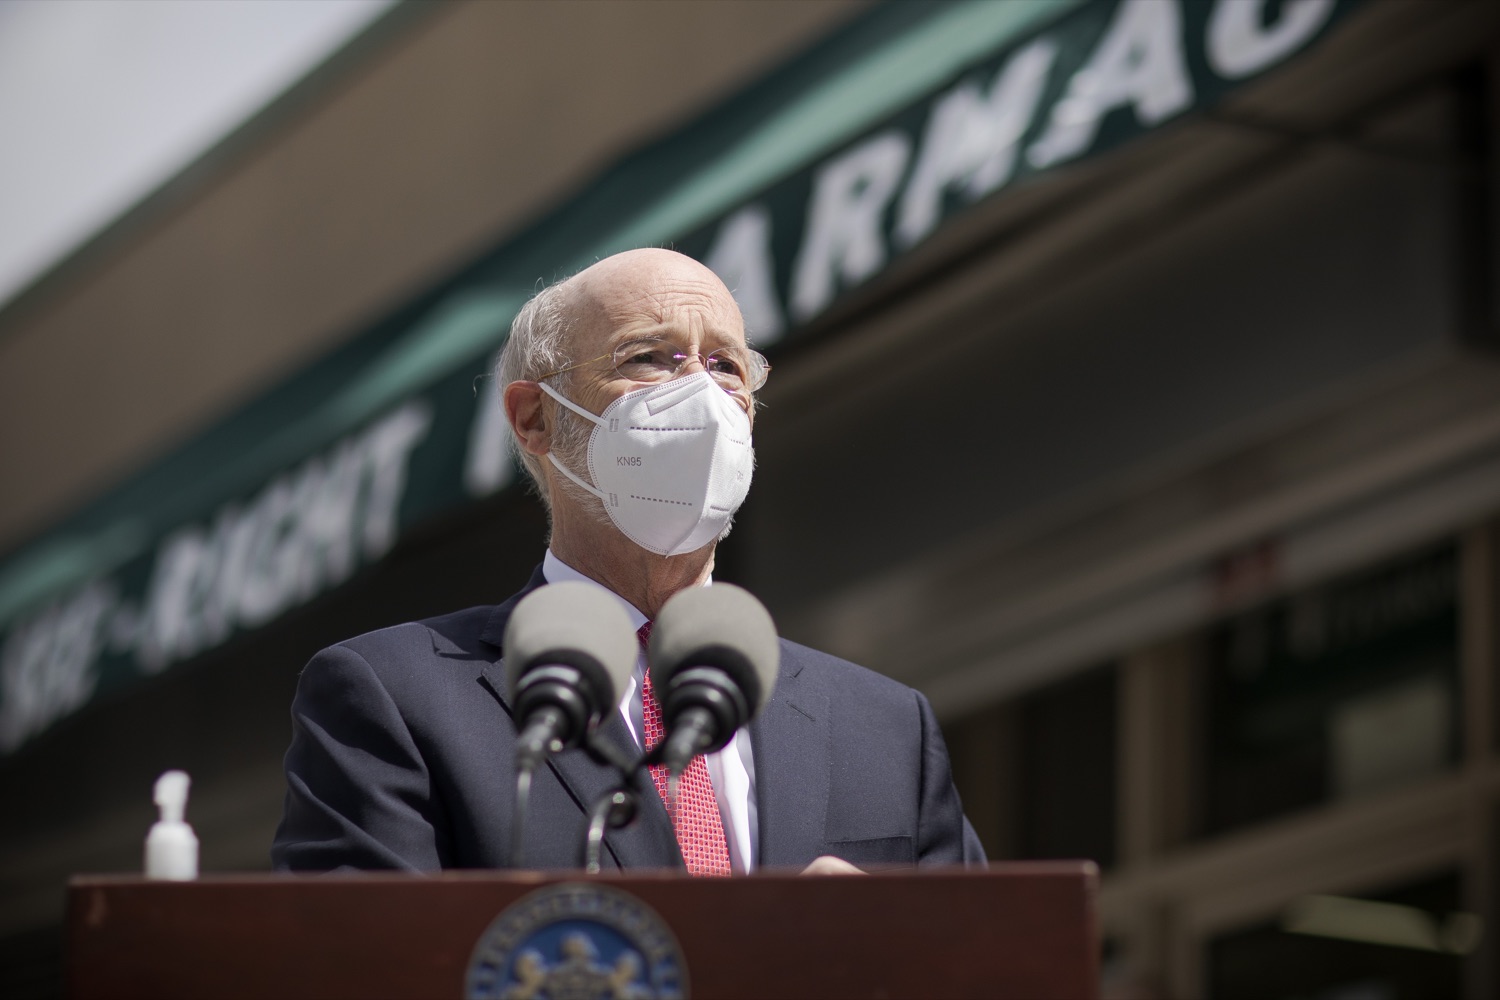 Pennsylvania Governor Tom Wolf speaking with the press.  Governor Tom Wolf today visited See-Right Pharmacy in Harrisburg to learn more about how the local, neighborhood pharmacy is vaccinating community members and to talk about COVID-19 vaccine hesitancy in Pennsylvania. Harrisburg, PA  April 22, 2021<br><a href="https://filesource.amperwave.net/commonwealthofpa/photo/18704_gov_seeRight_dz_019.jpg" target="_blank">⇣ Download Photo</a>